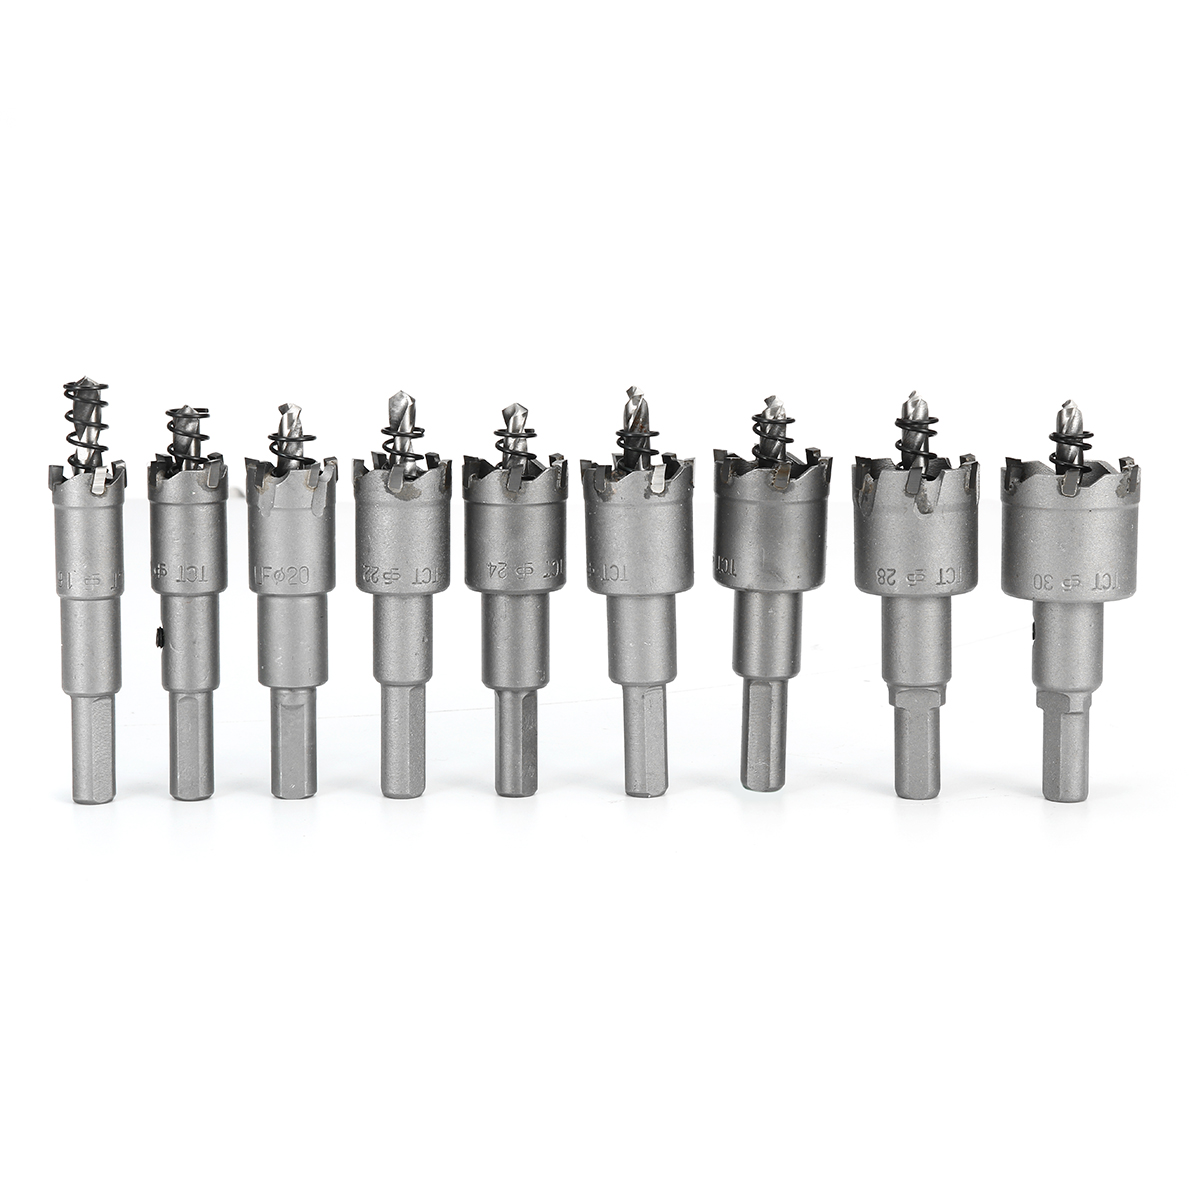 16mm-to-30mm-How-Saw-Cutter-Alloy-Hole-Opener-Drill-Bits-1679223-7